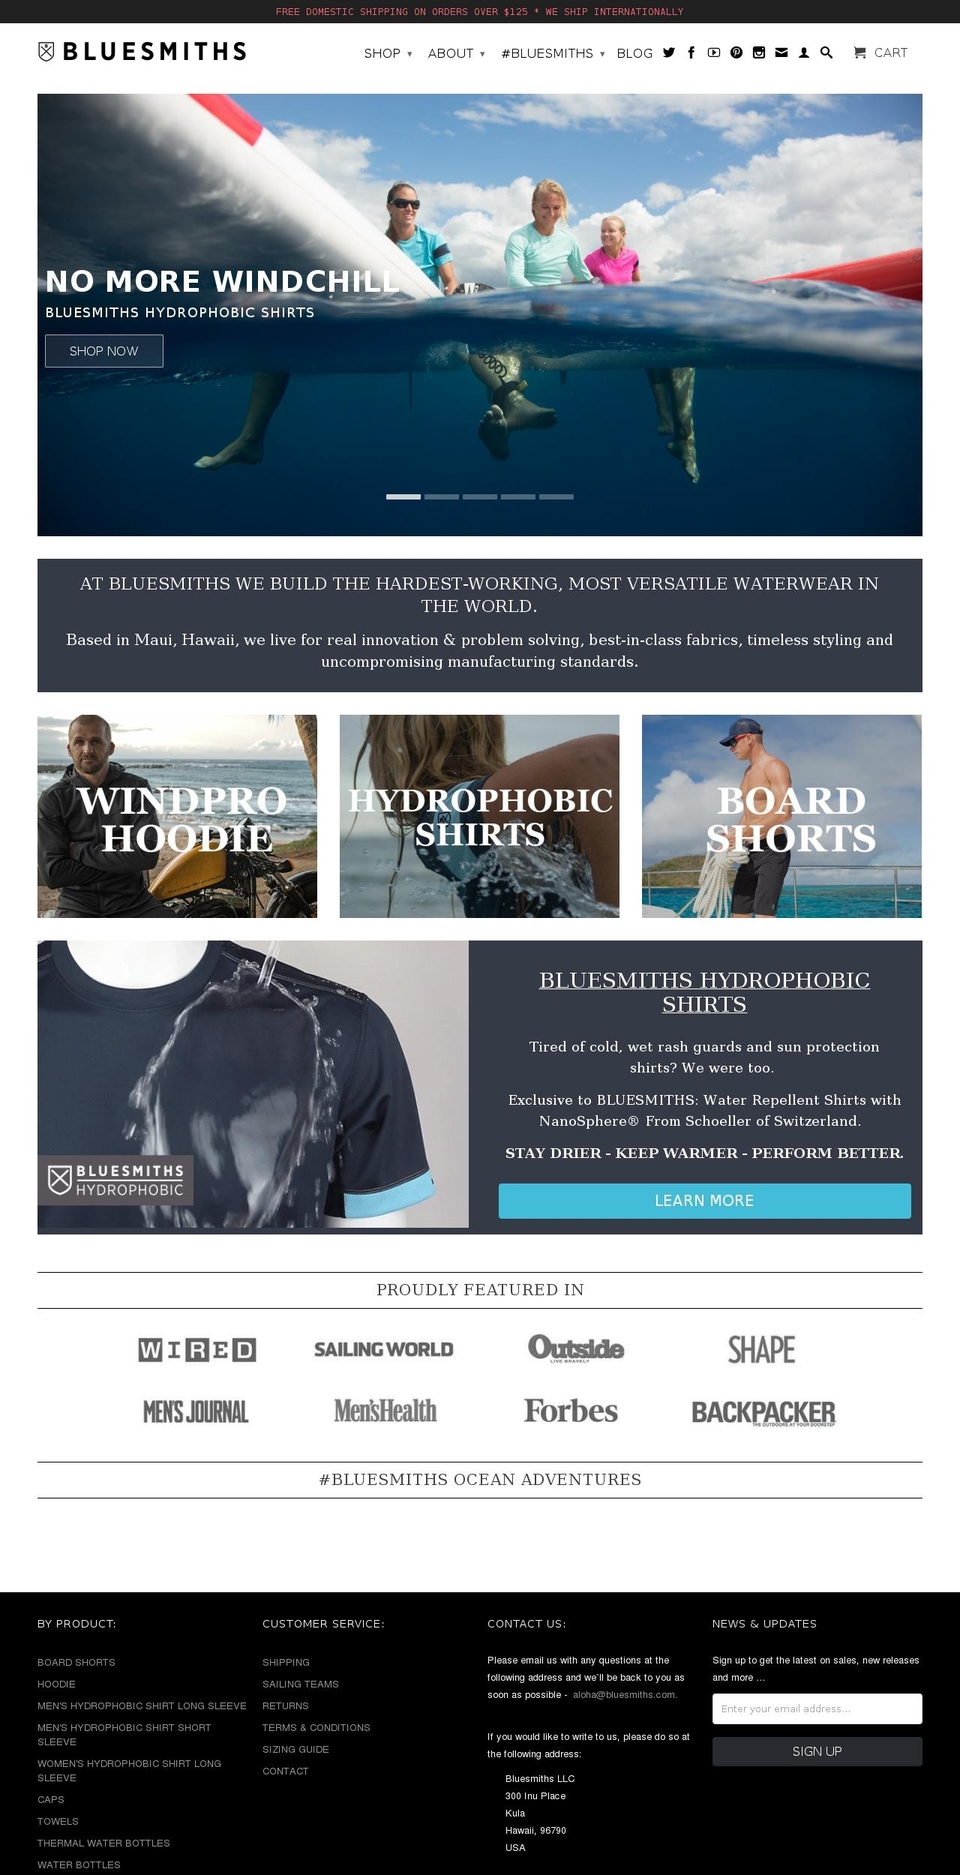 16.05.30 April 24 2016 Retina Version 3.2 Shopify theme site example craftedwaterwear.com